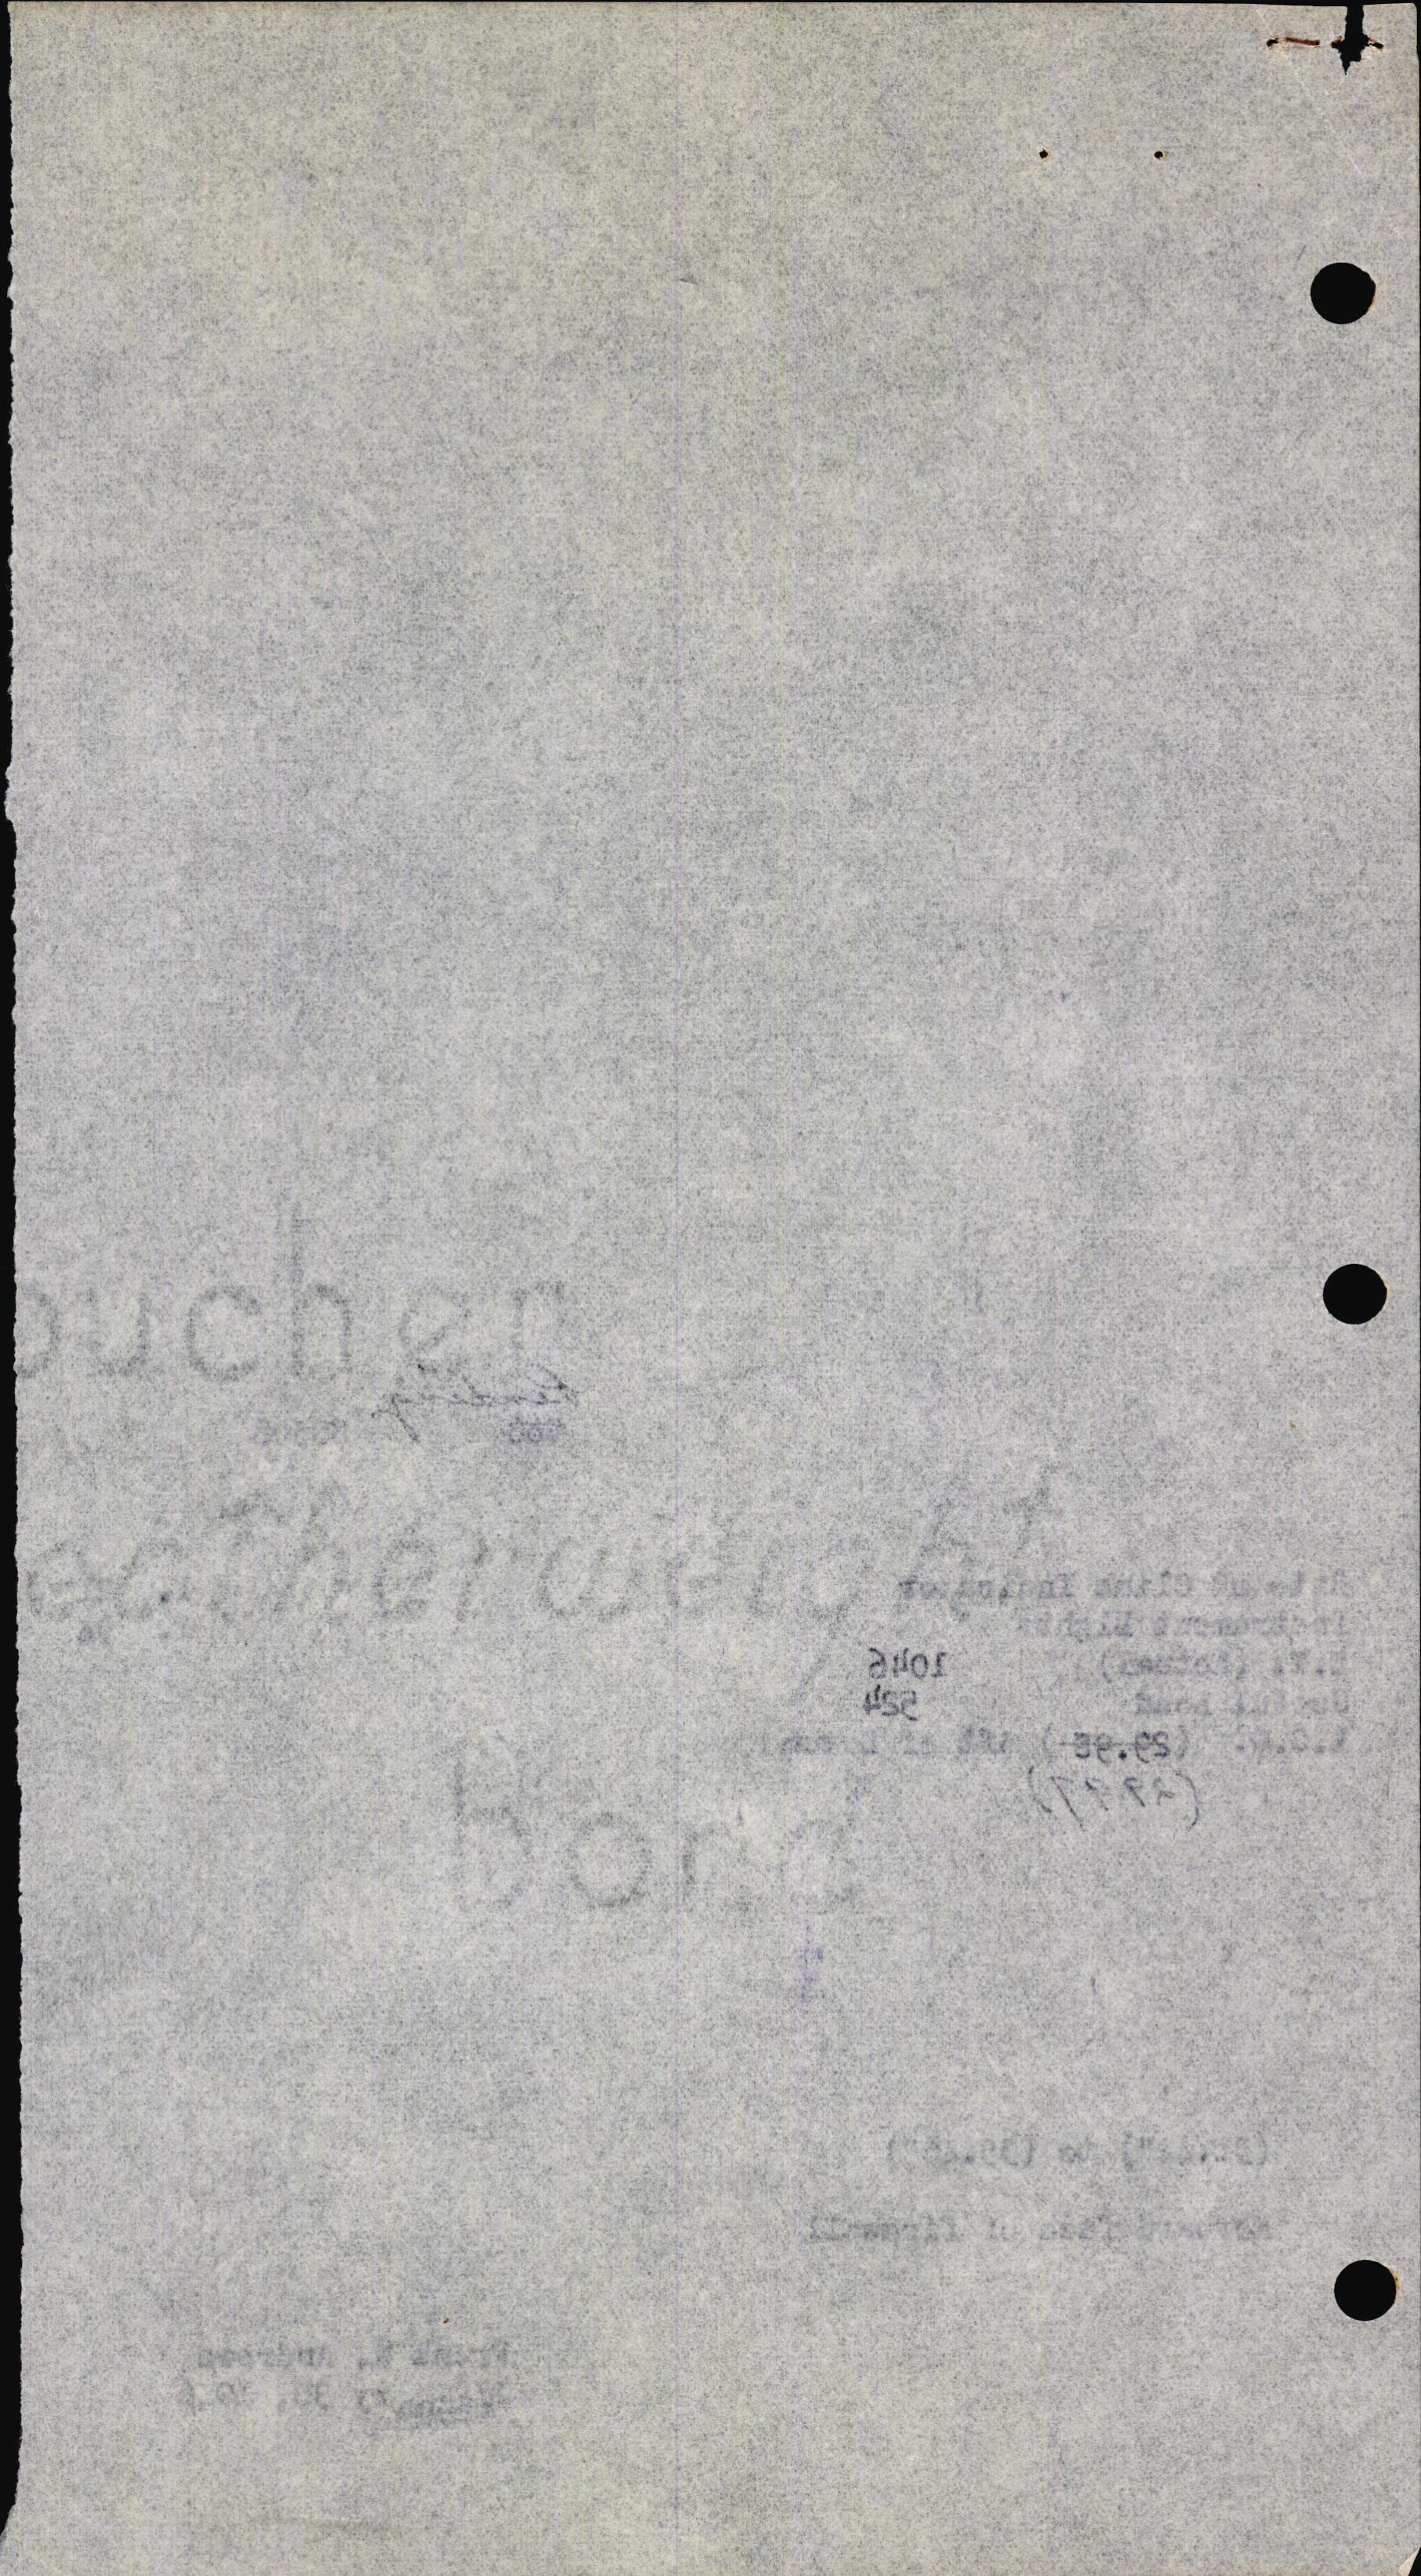 Sample page 4 from AirCorps Library document: Technical Information for Serial Number 11